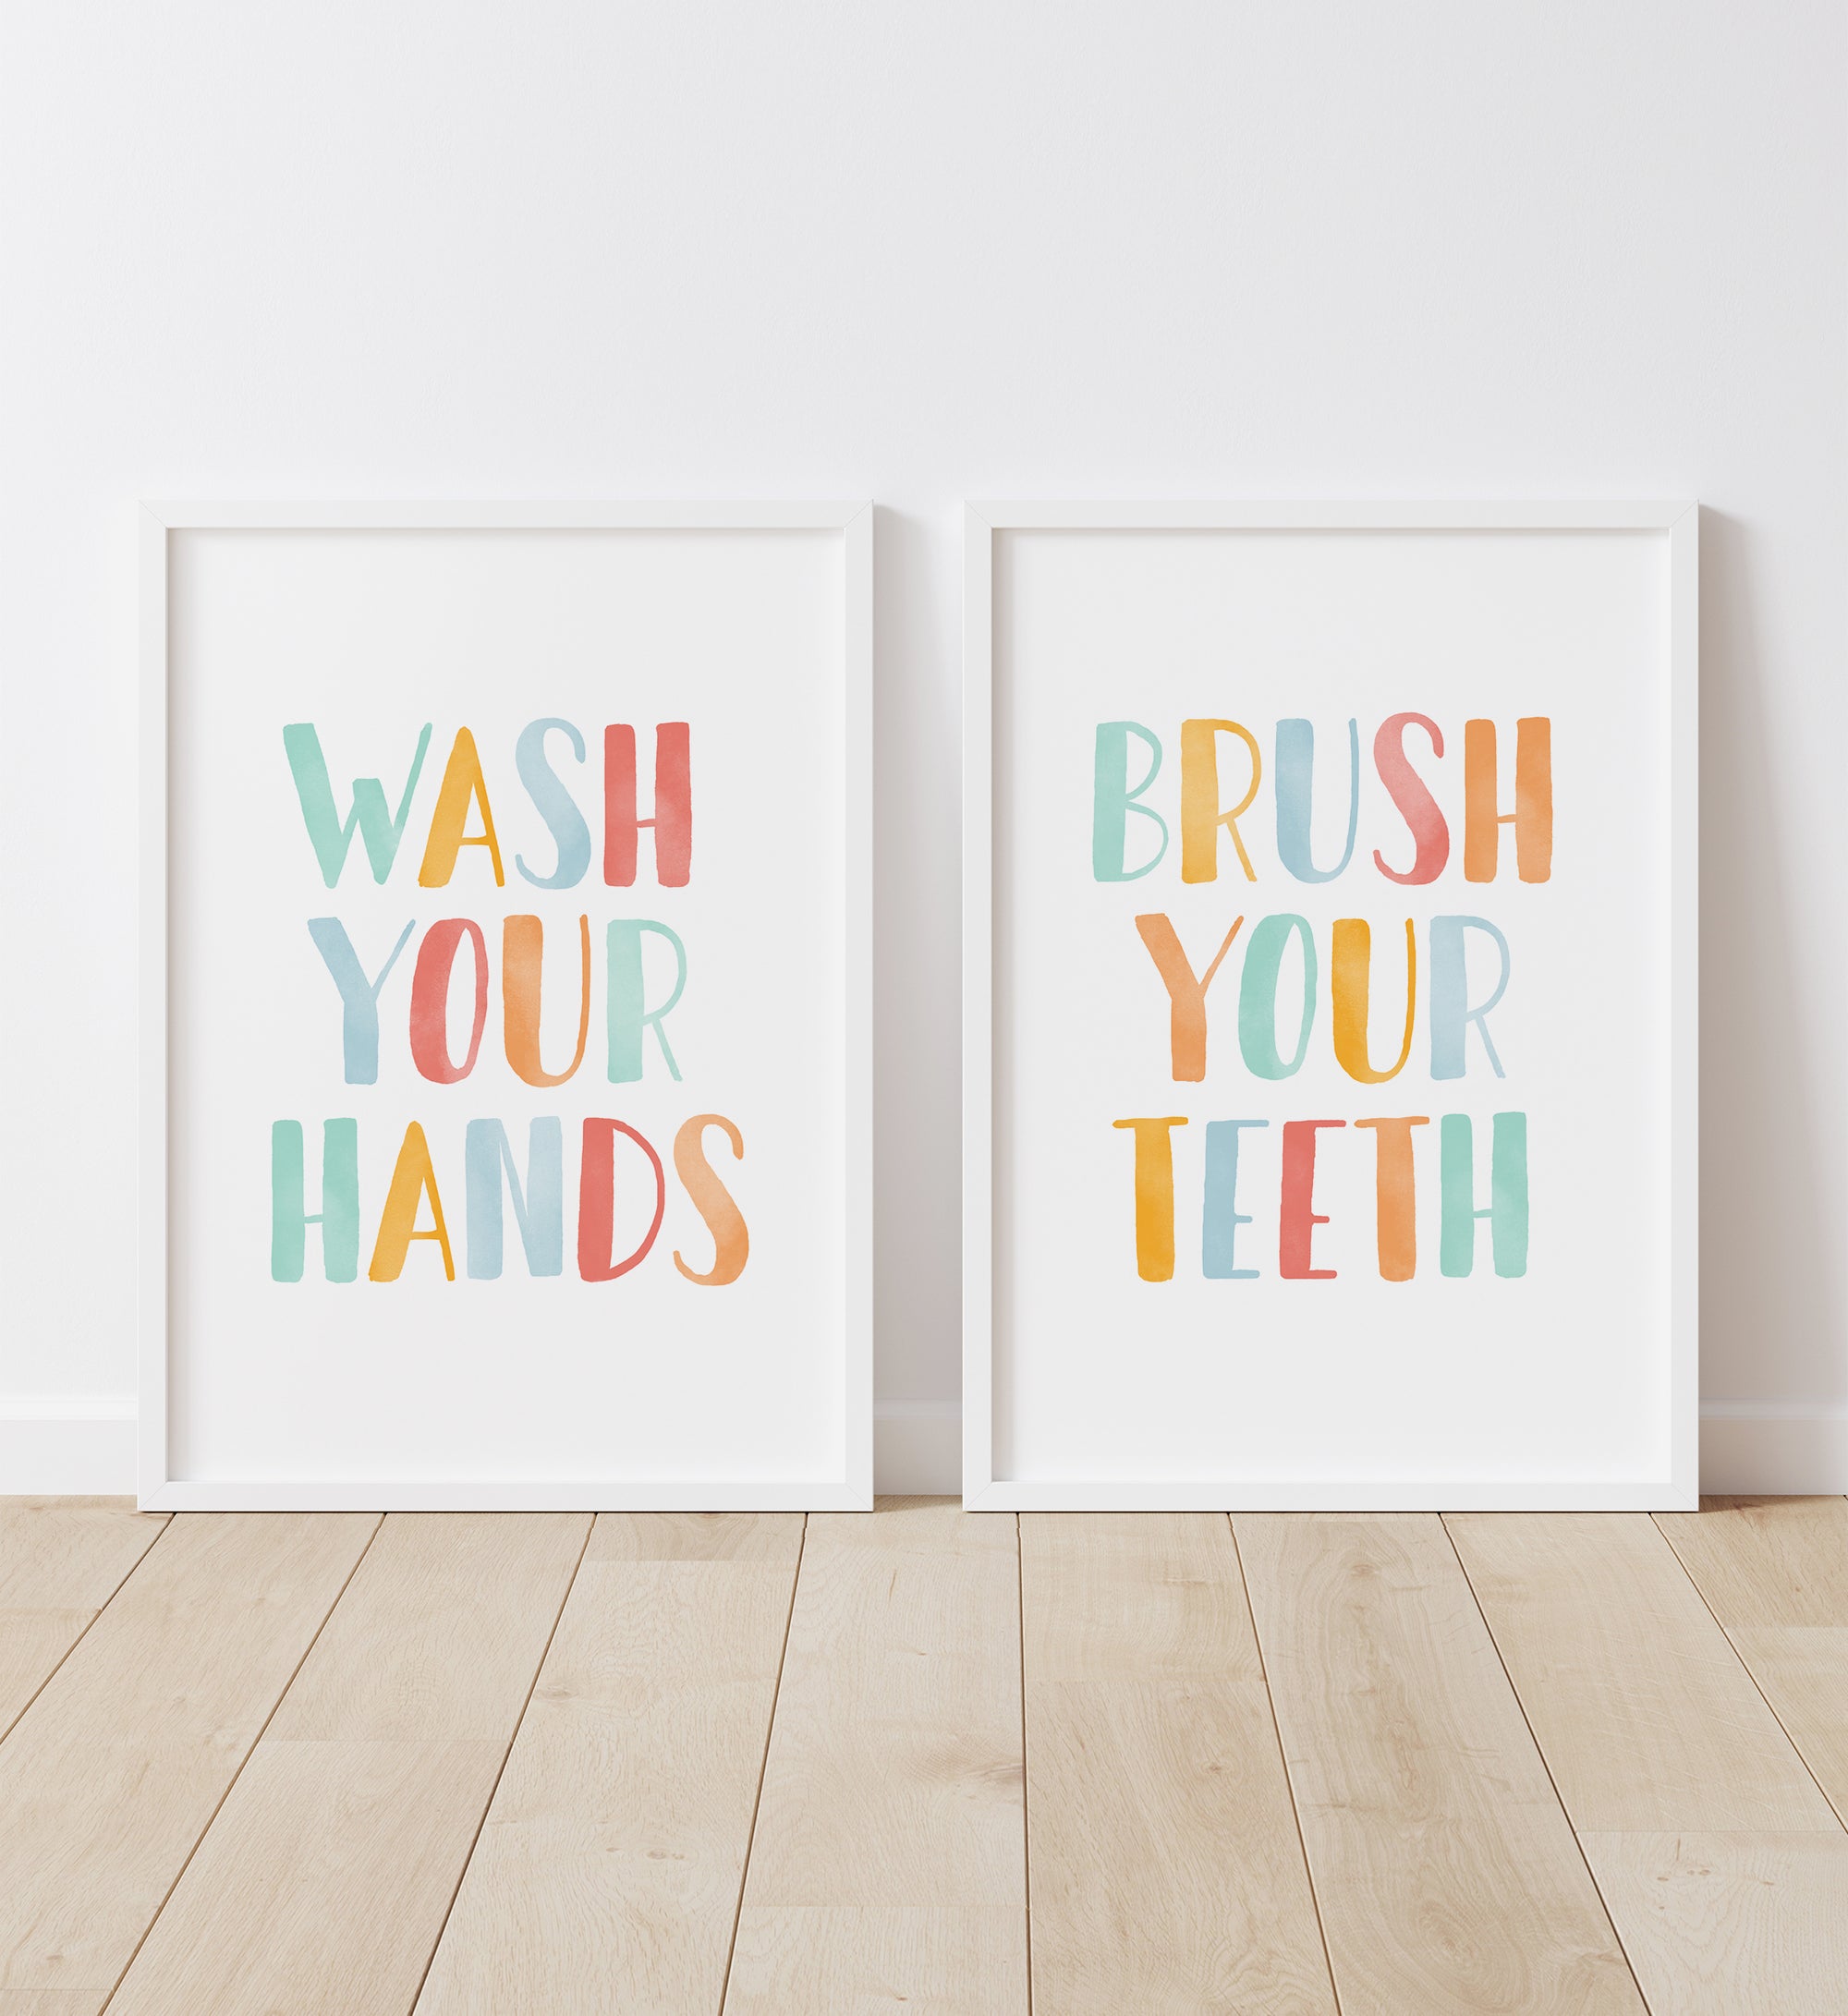 Wash Your Hands, Brush Your Teeth Set of 2 Prints No. 1